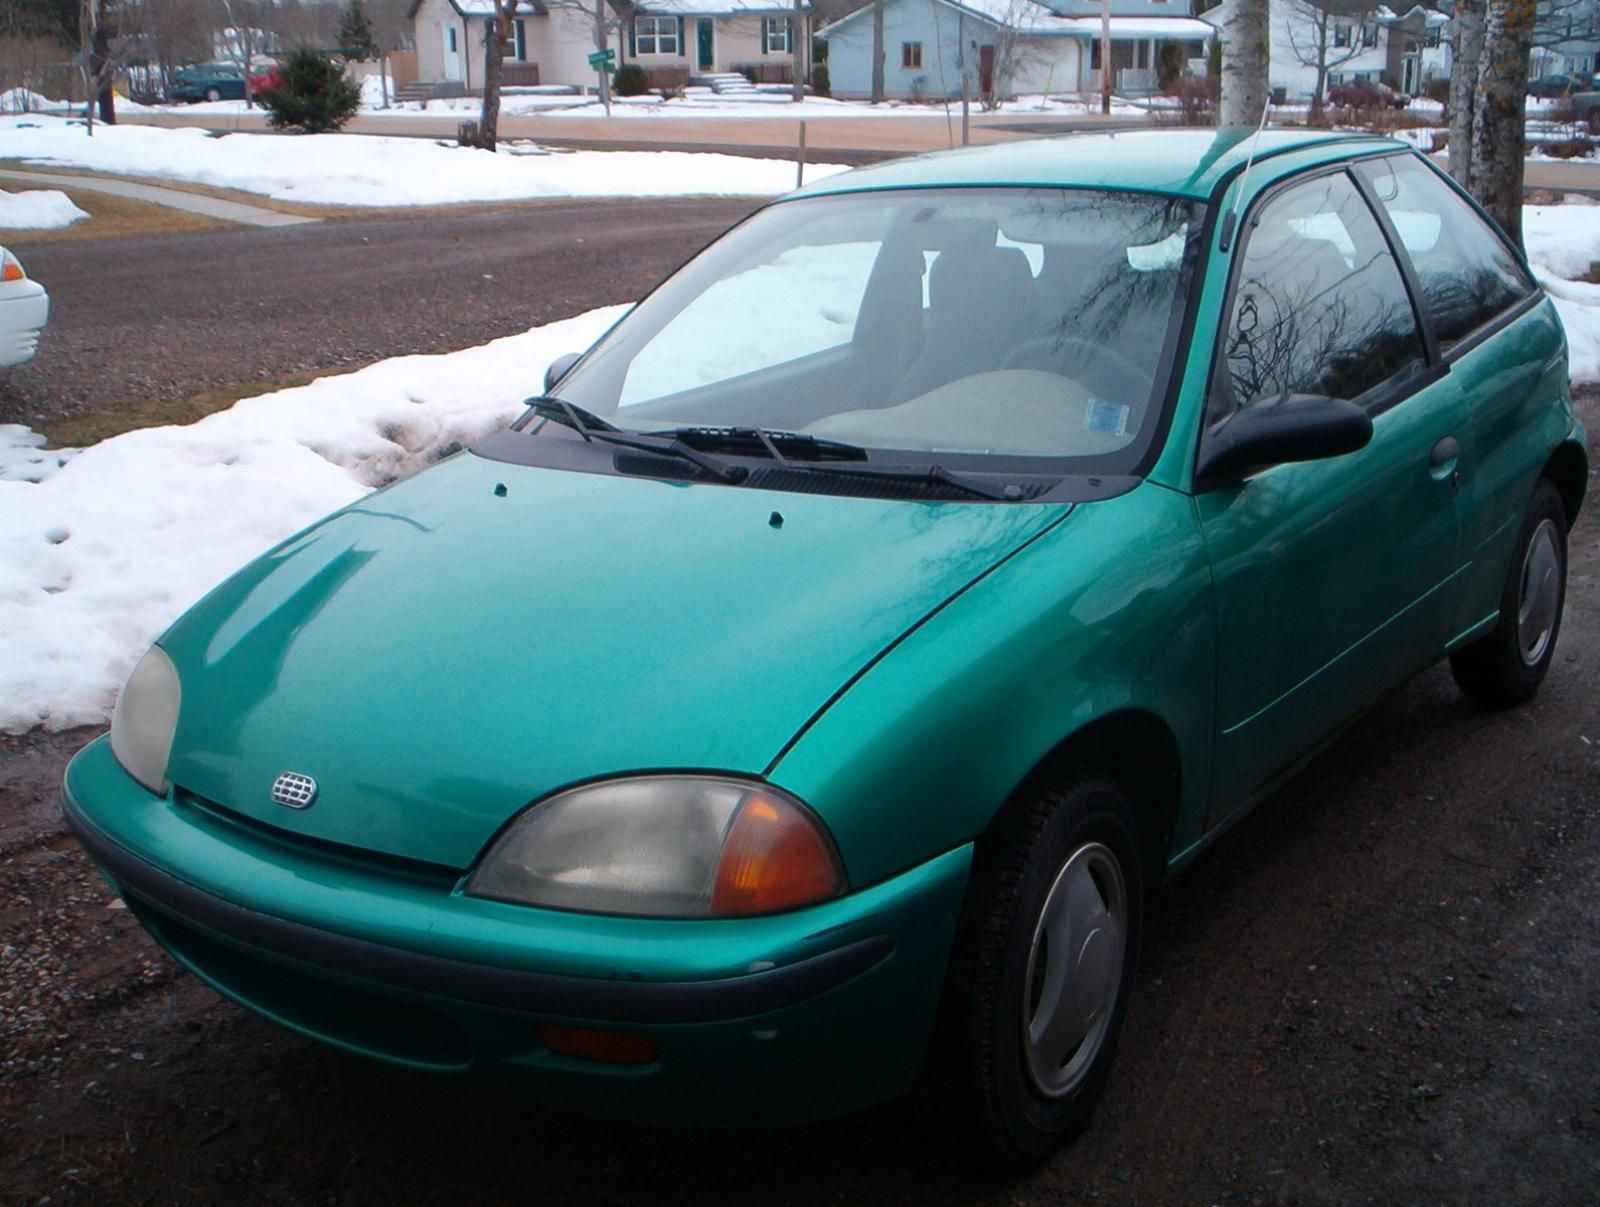 1997 Geo Metro 4-dr base 0-60 Times, Top Speed, Specs, Quarter Mile, and  Wallpapers - MyCarSpecs United States / USA